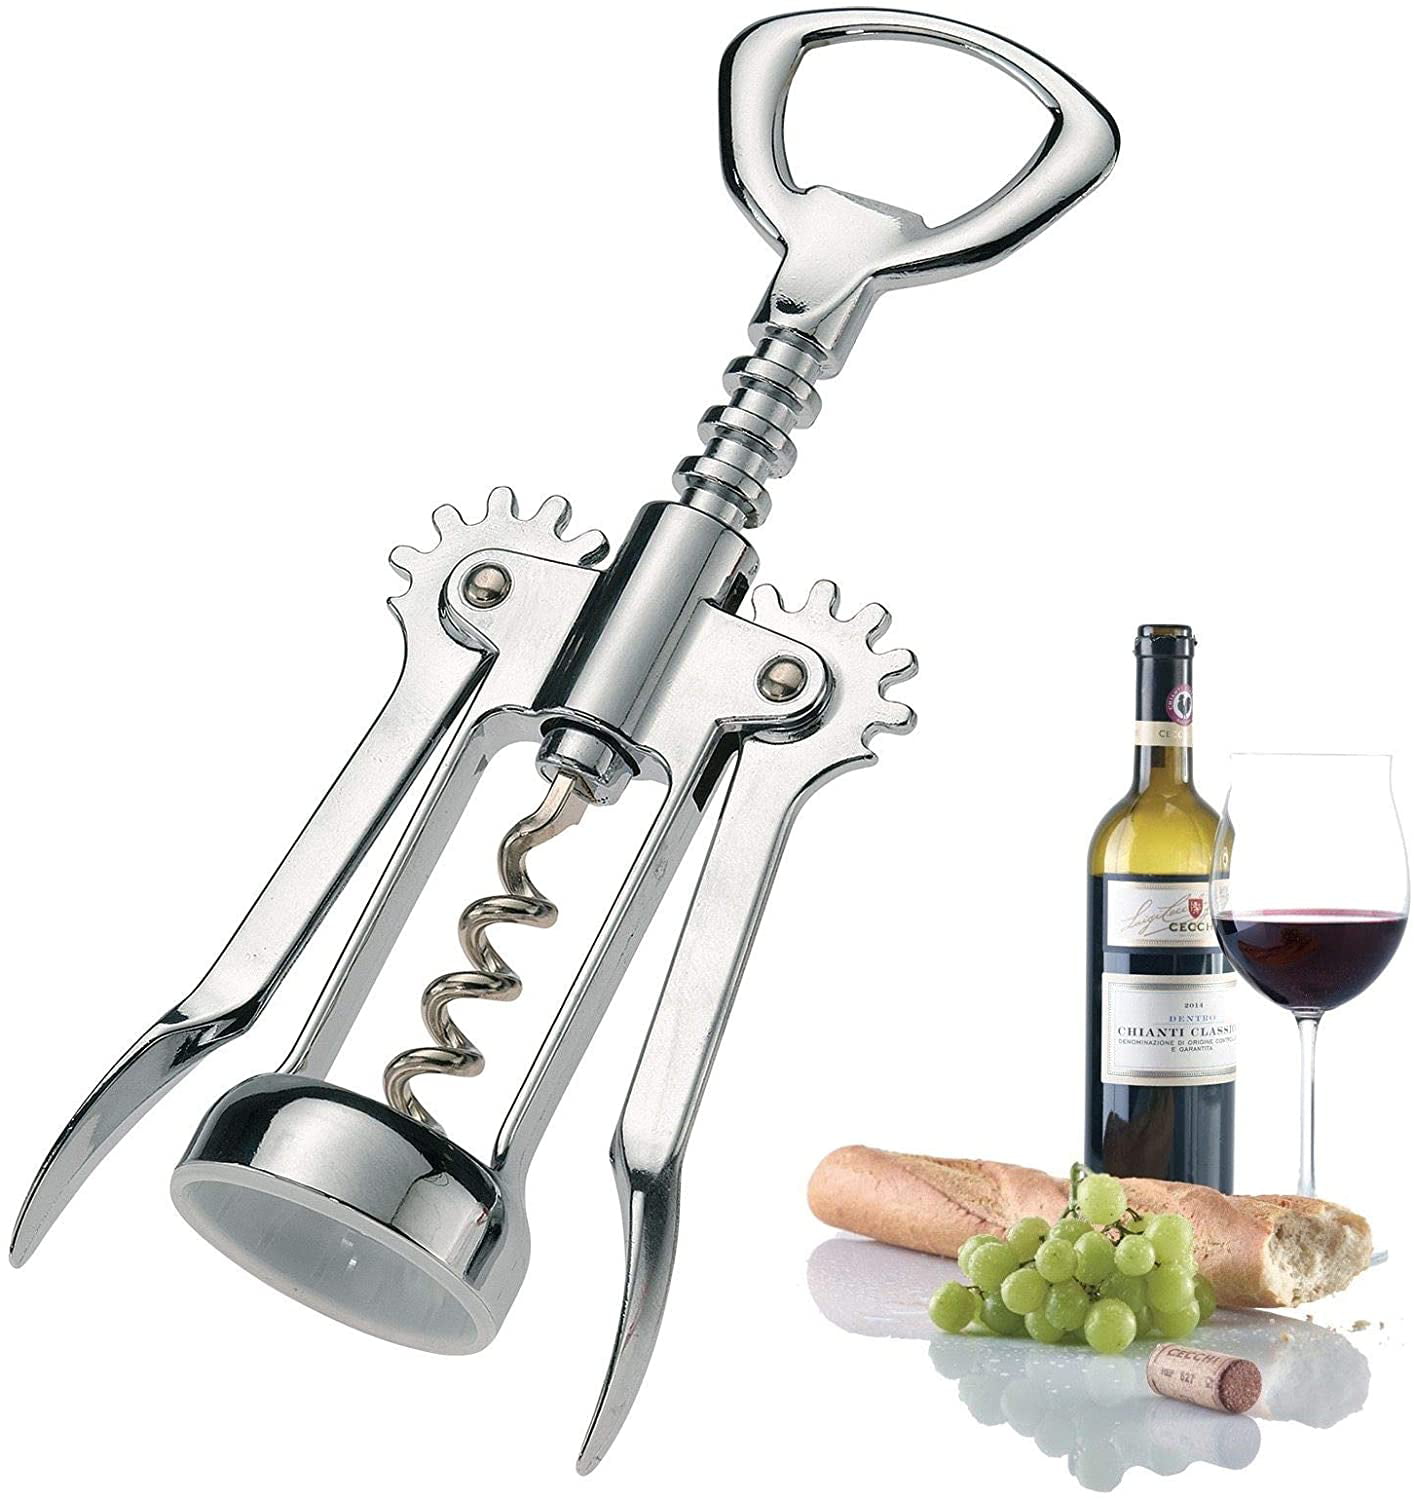 Brand New Chrome Plated Wine Beer Bottle Opener Wing Corkscrew With Steel Handle 